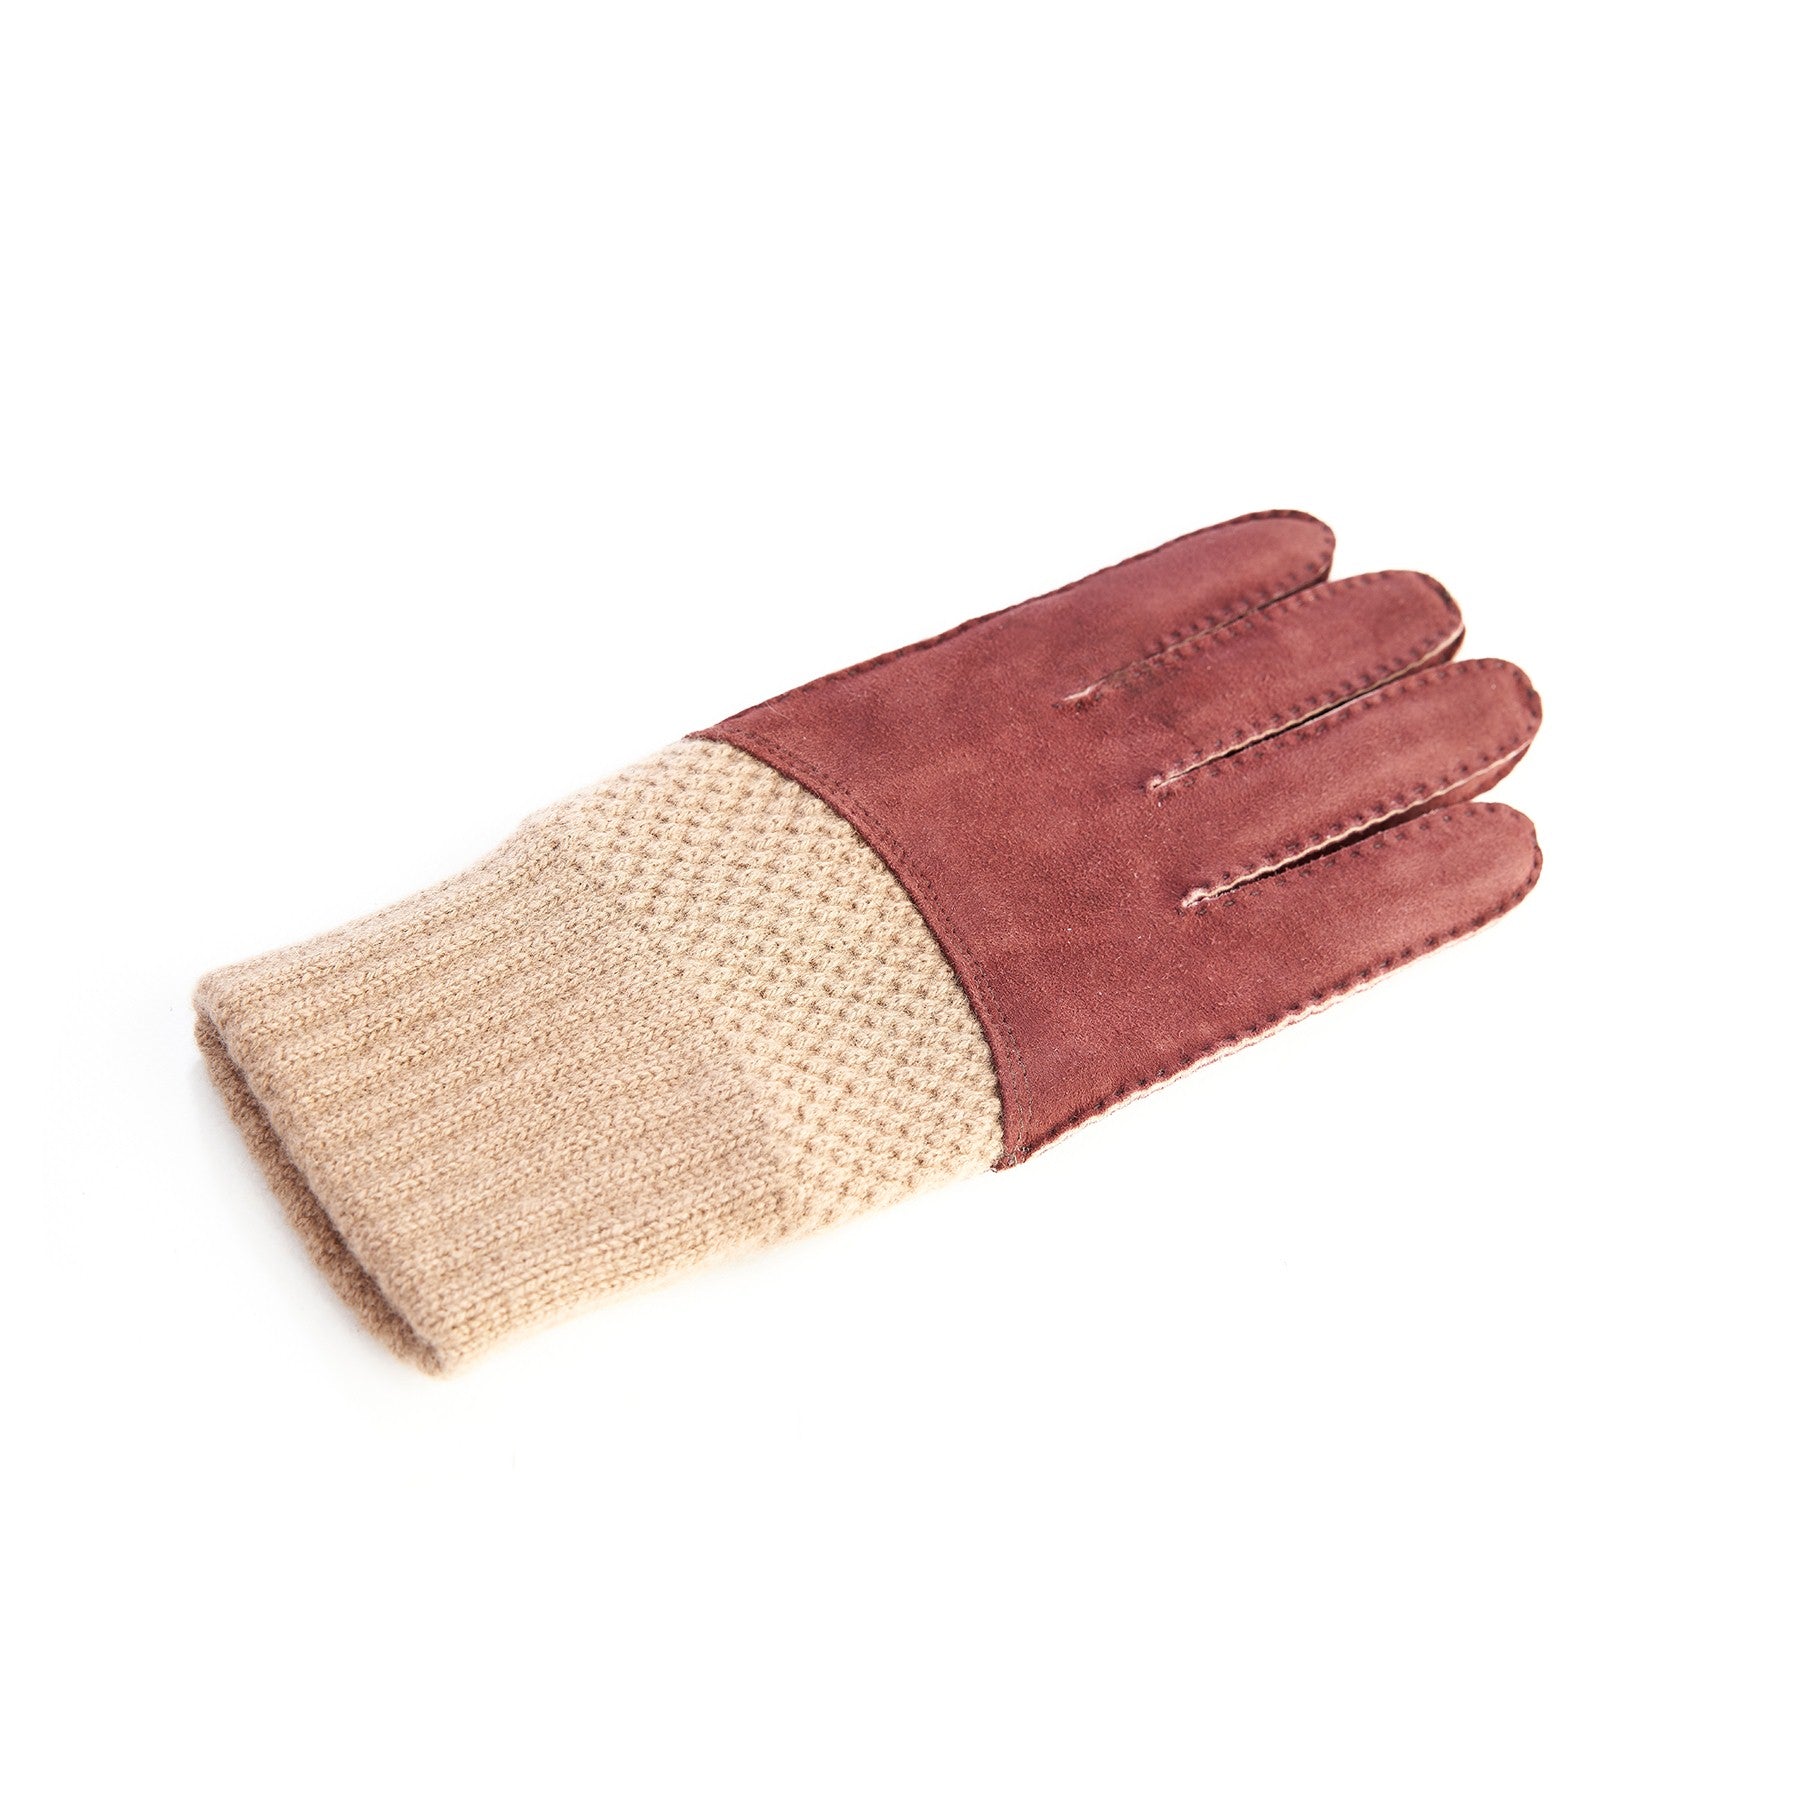 Men's hand-stitched bordeaux suede gloves with cashmere top and lining